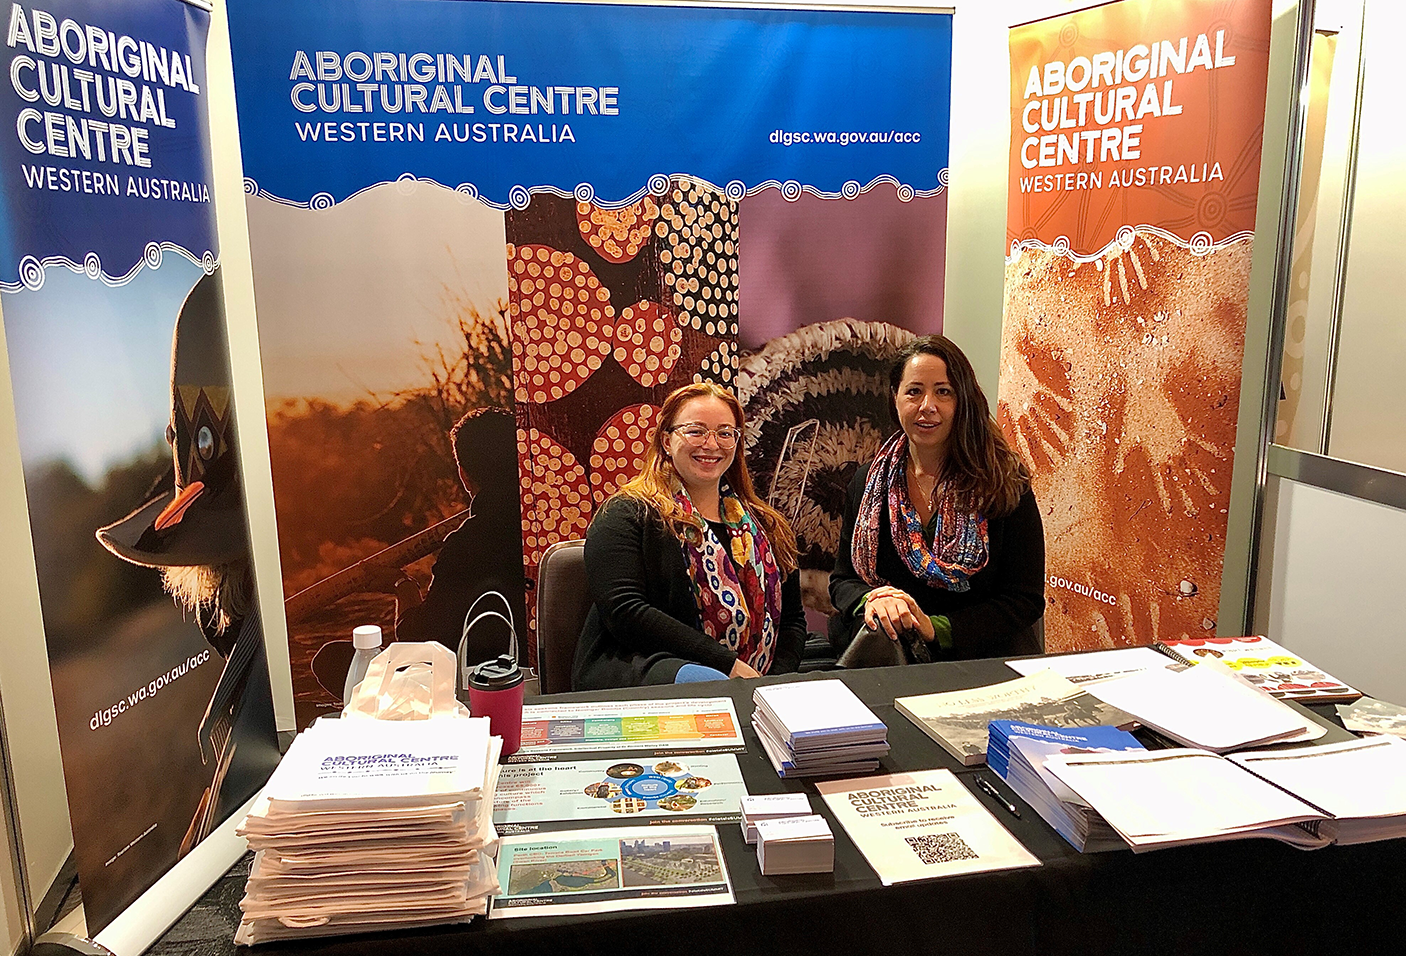 Photo (left to right): Executive Manager, Bethan Smillie and Project Manager of Engagement and Communications, Claire Muntinga from the Aboriginal Cultural Centre project team. 